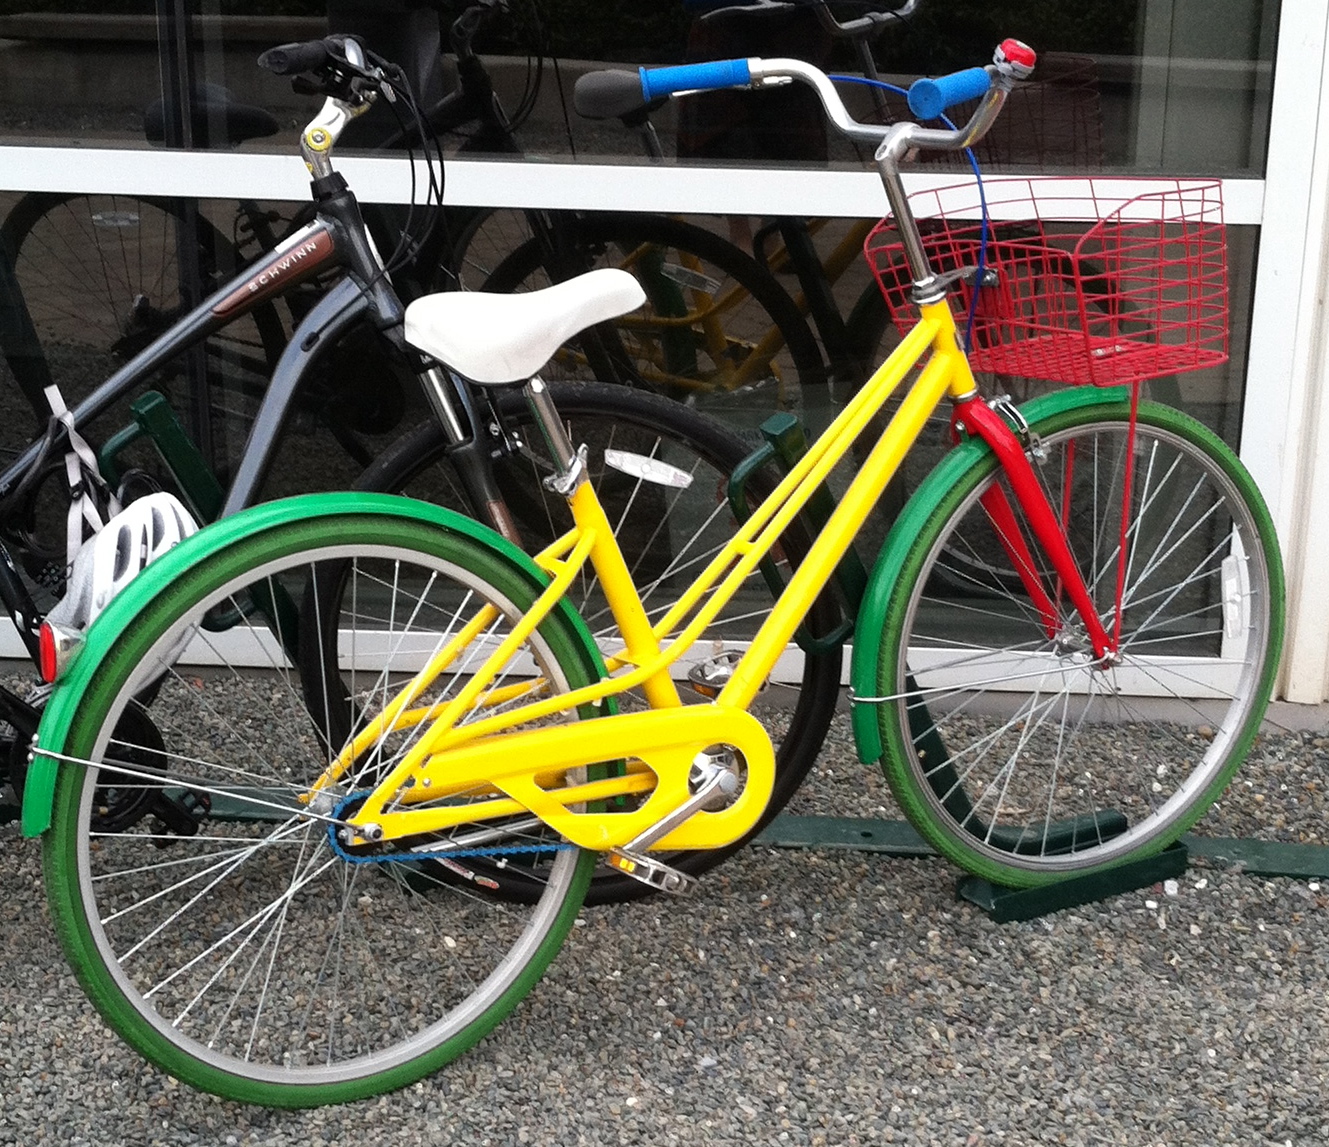 Beautifully simple Google bike, an example of bike designs done by creative imagination